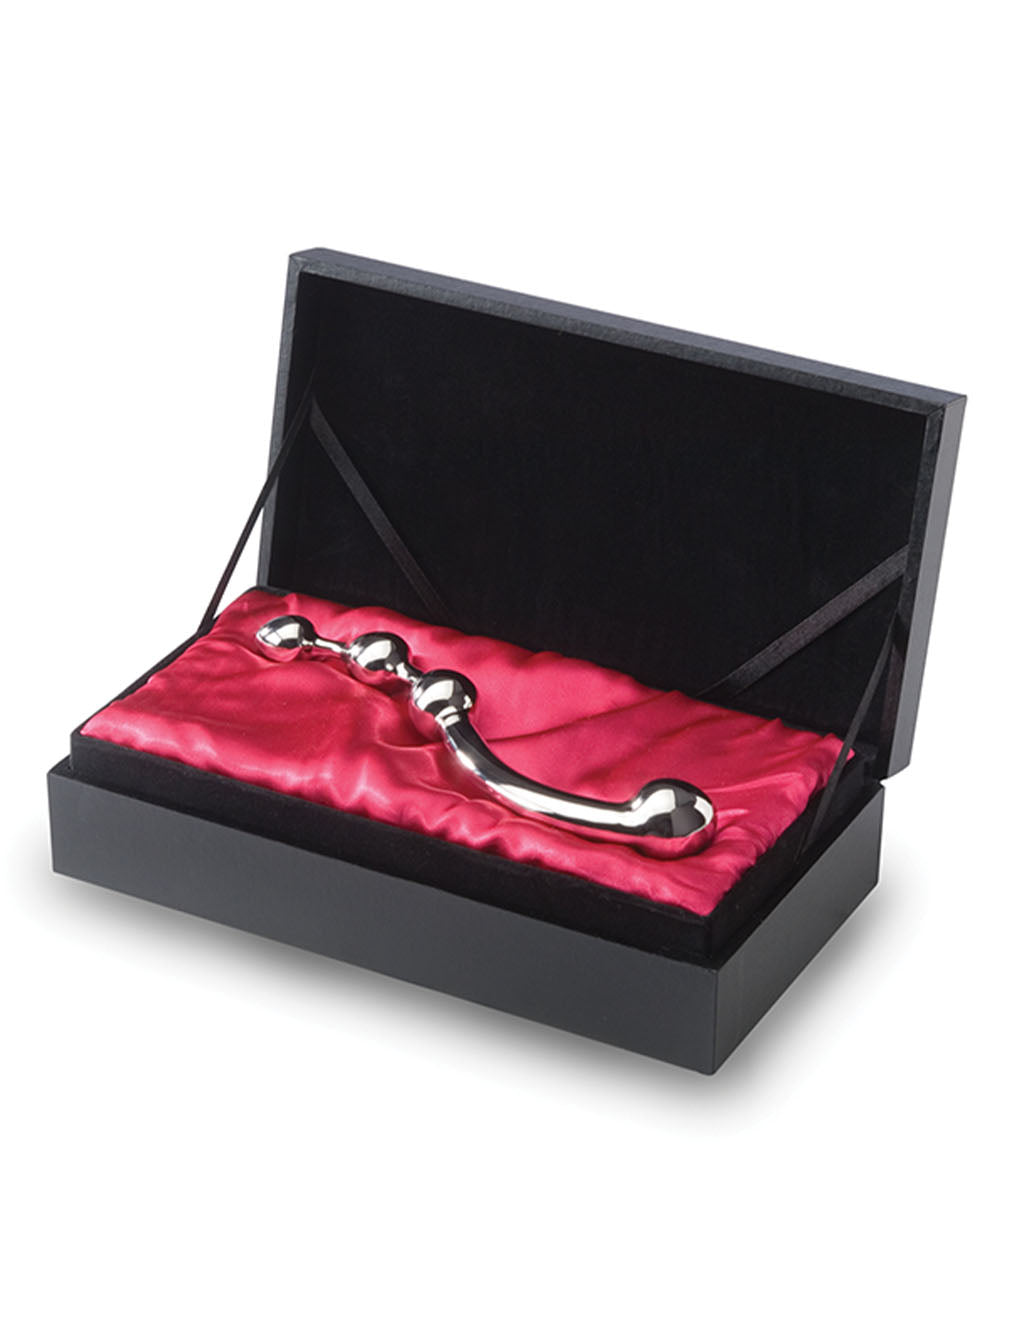 Njoy Fun Beaded Double Ended Stainless Steel Dildo- In box